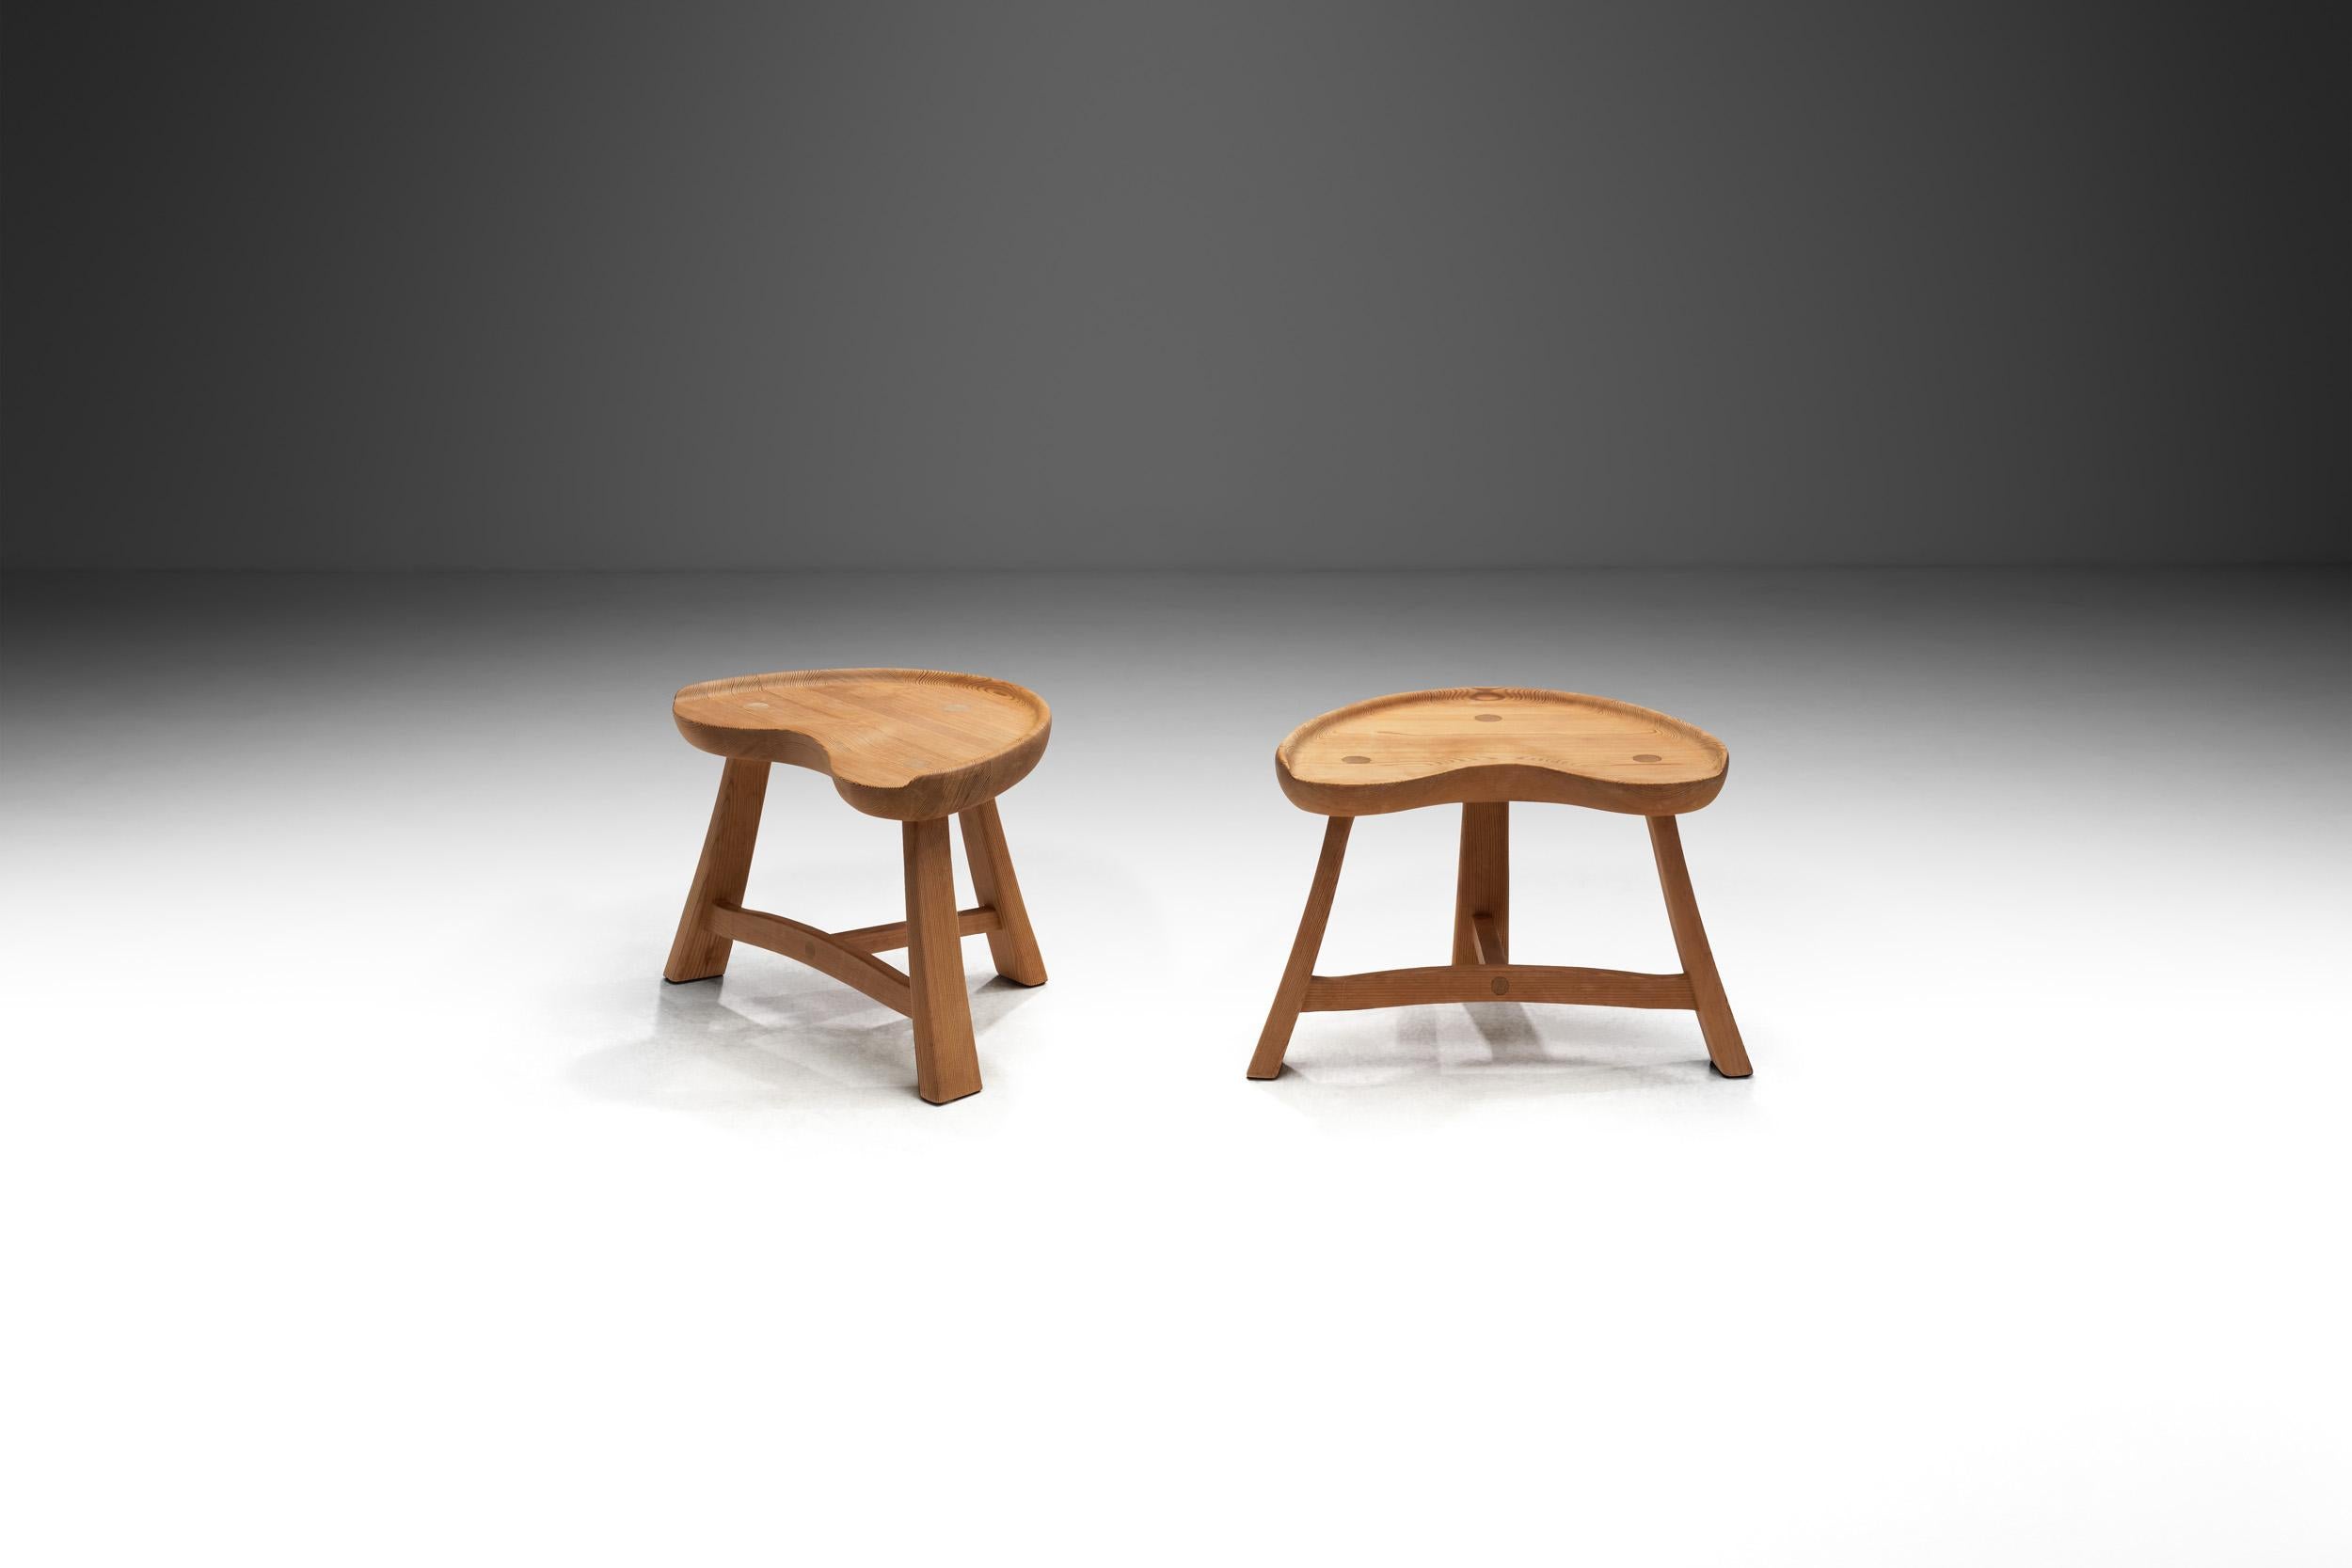 What makes wood so appealing besides its natural beauty is the ease in which it can be cut and the array of beautiful shapes that can be sculpted from it. These mid-century stools known as “Fjøskrakk (barn stool)” Mod. 522, were created by Krogenæs